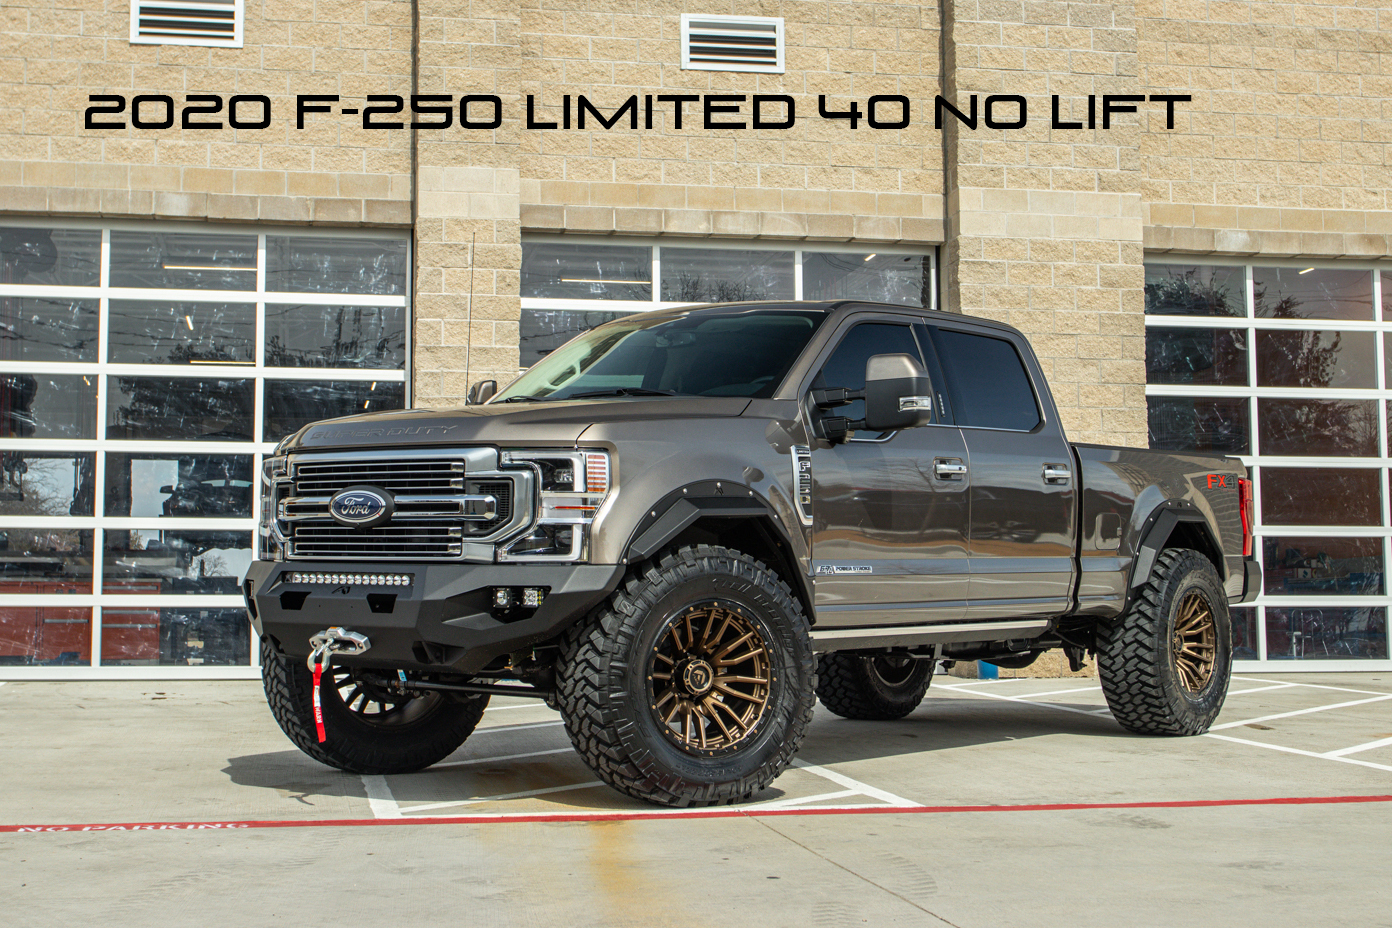 Real heavy duty Lifted Fords  Lifted ford trucks, Lifted trucks